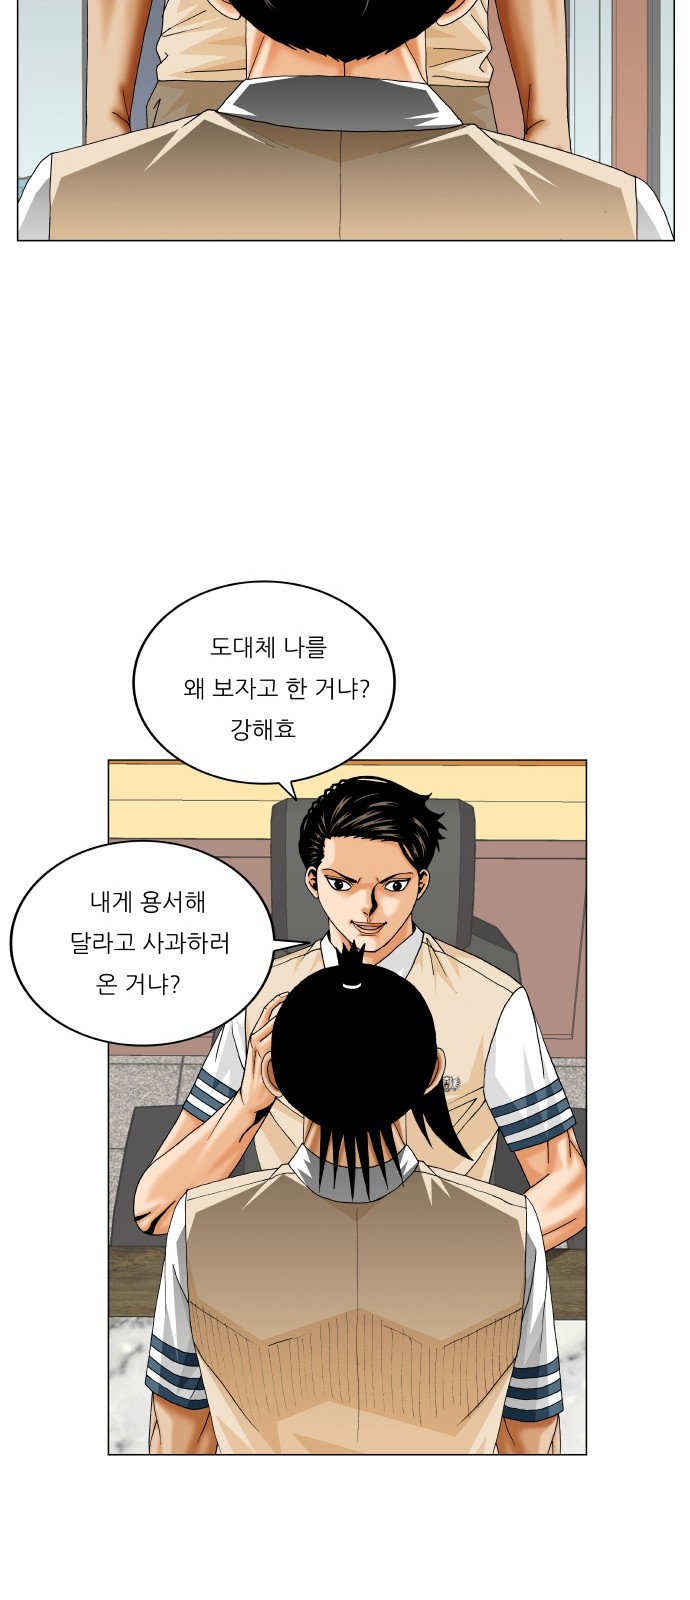 Ultimate Legend - Kang Hae Hyo - Chapter 307 - Page 2